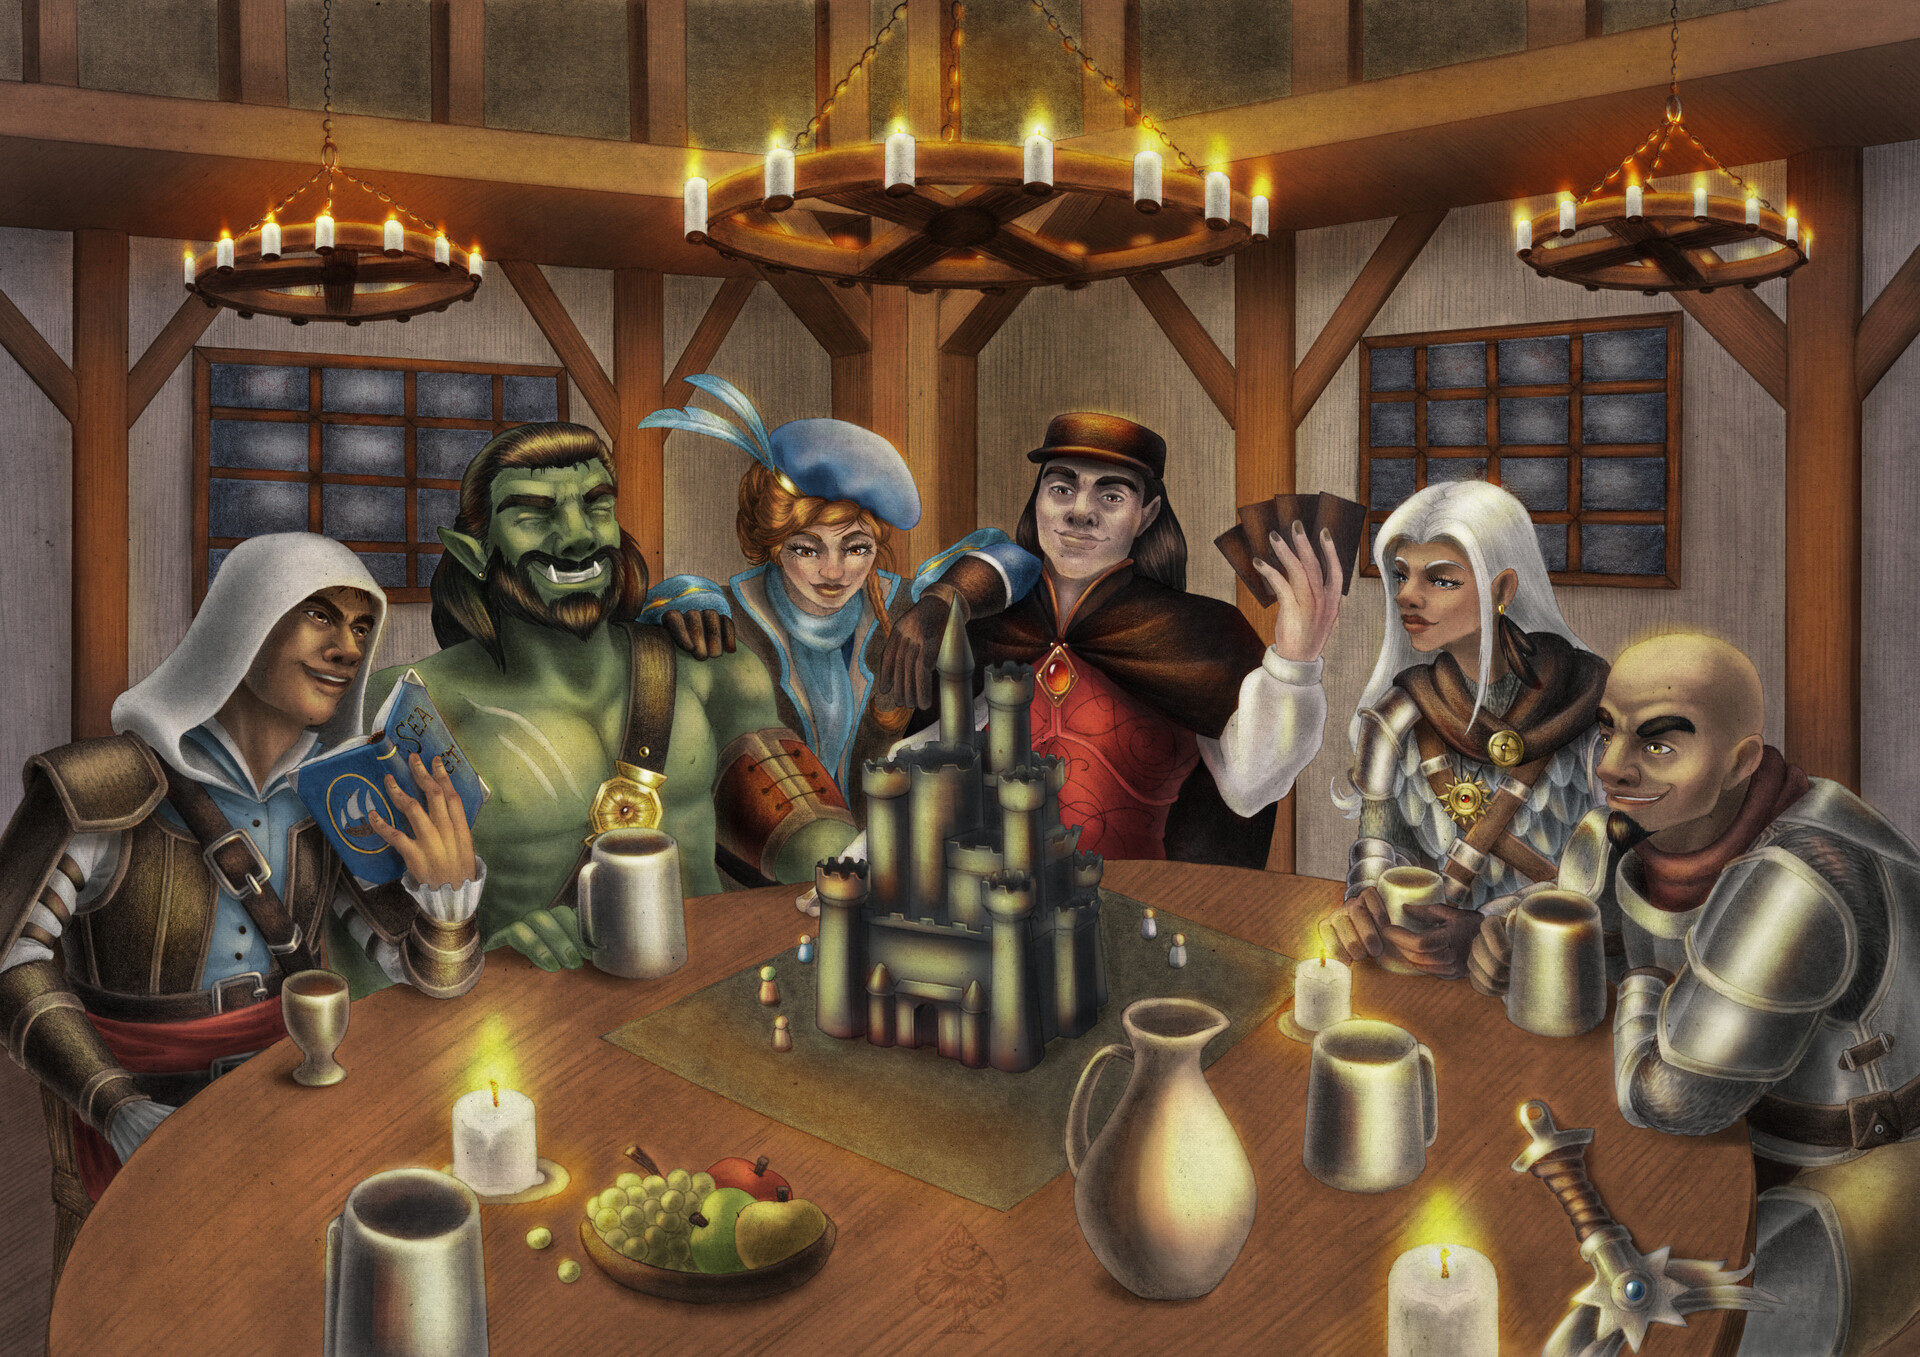 ArtStation - Curse of strahd party poster